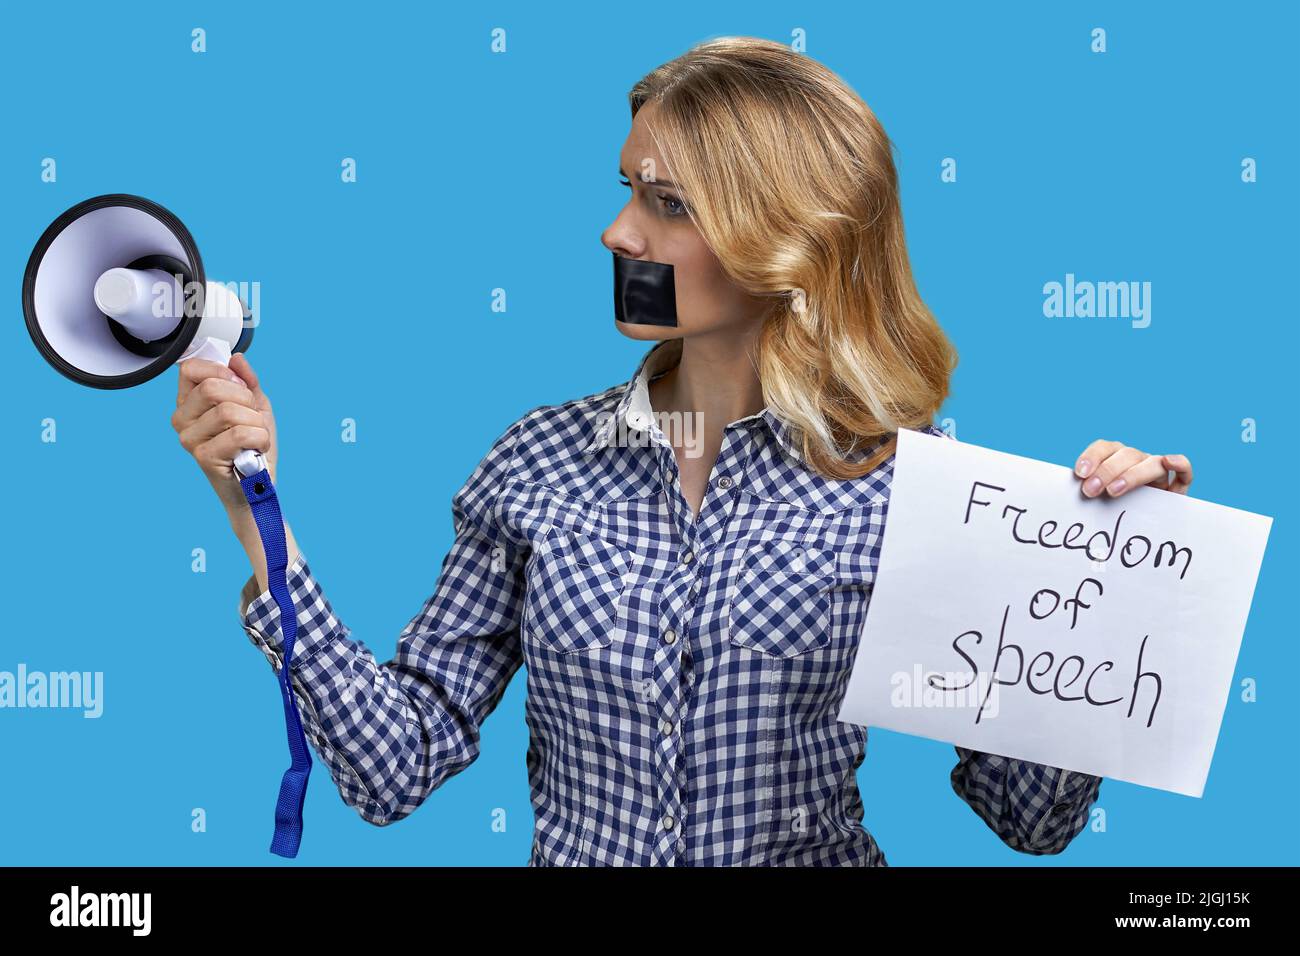 Young speechless woman with adhesive tape on mouth unable to speak in megaphone standing on color background. Freedom of speech. Stock Photo